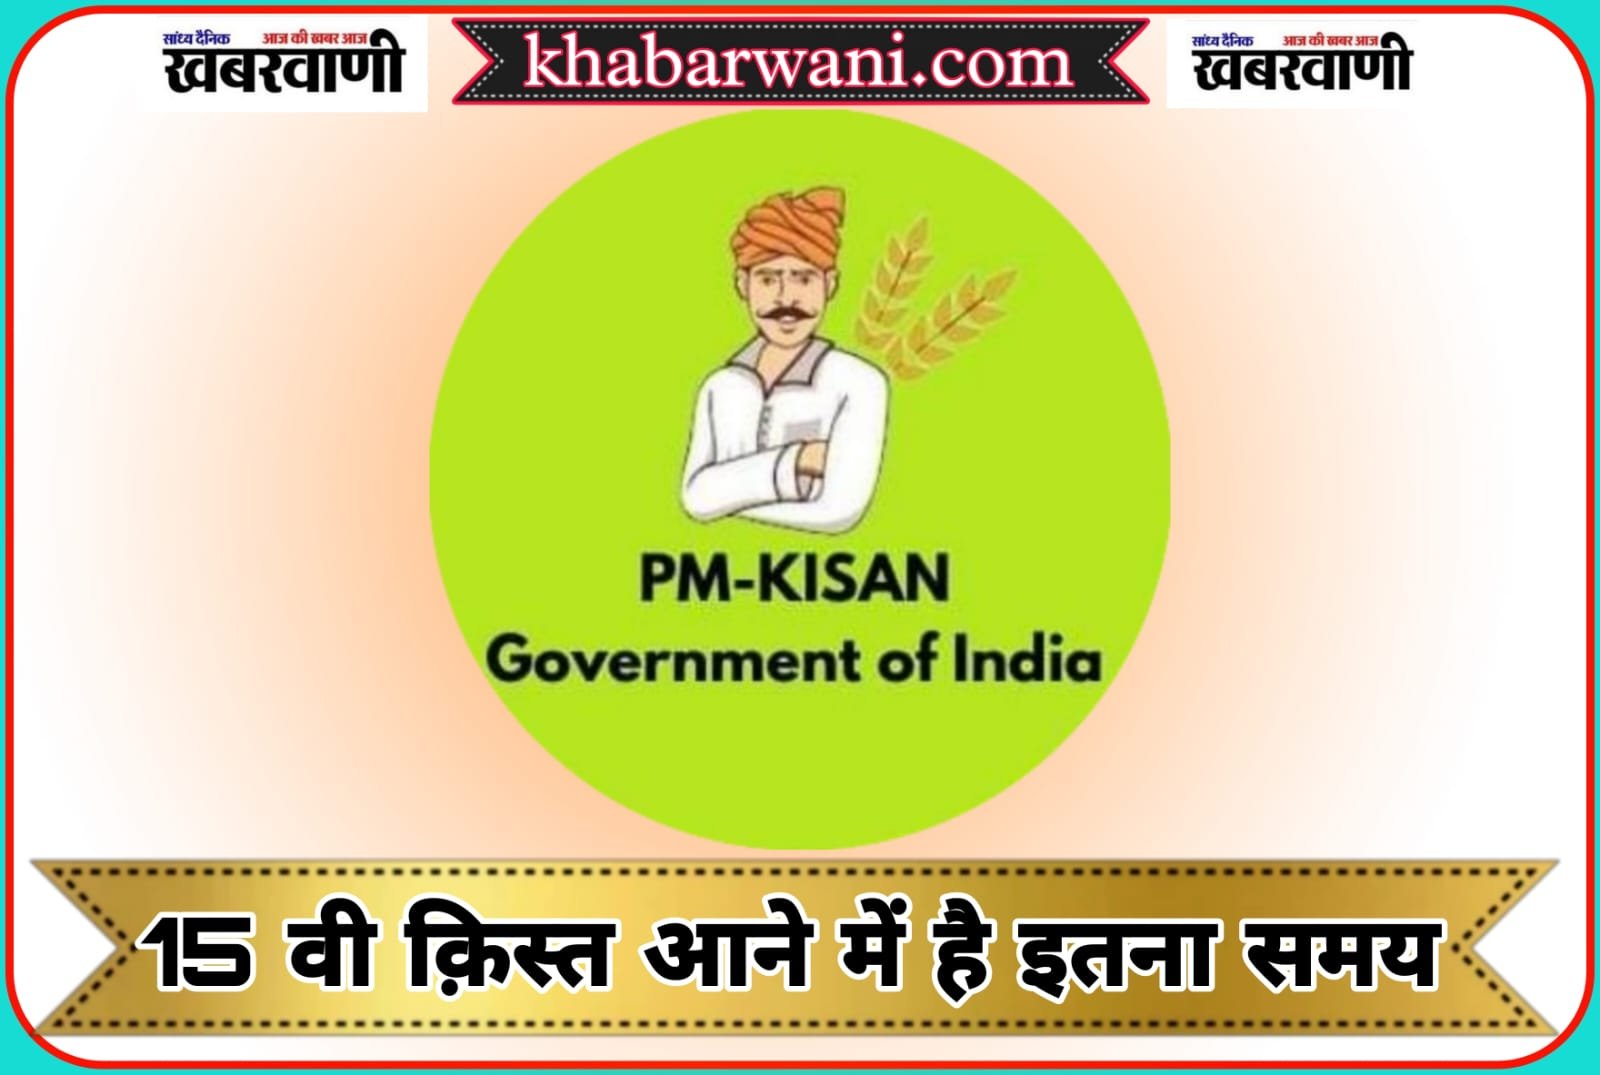 There is so much time left for the 15th installment of PM Kisan, complete these tasks